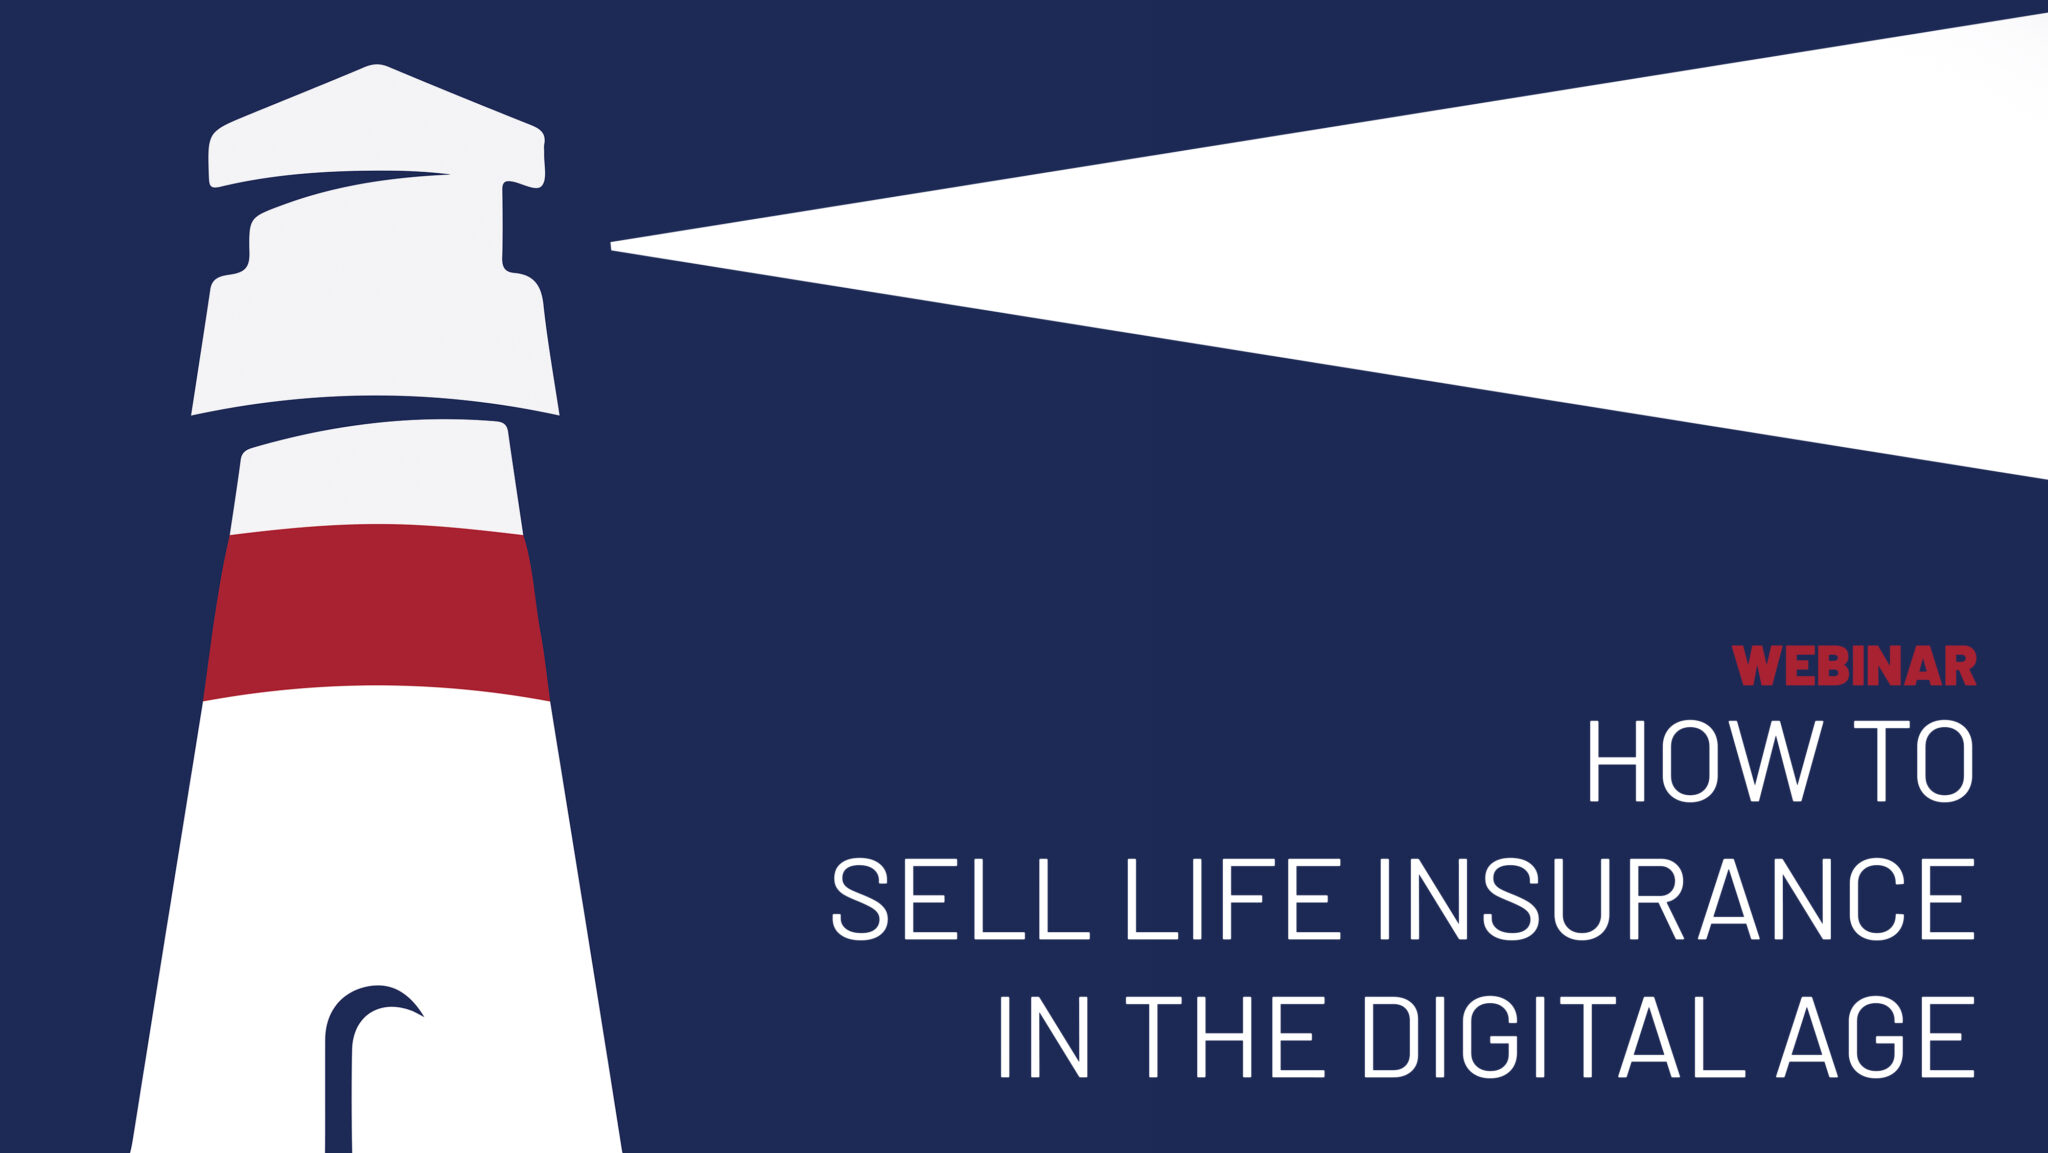 Webinar: How to Sell Life Insurance in the Digital Age